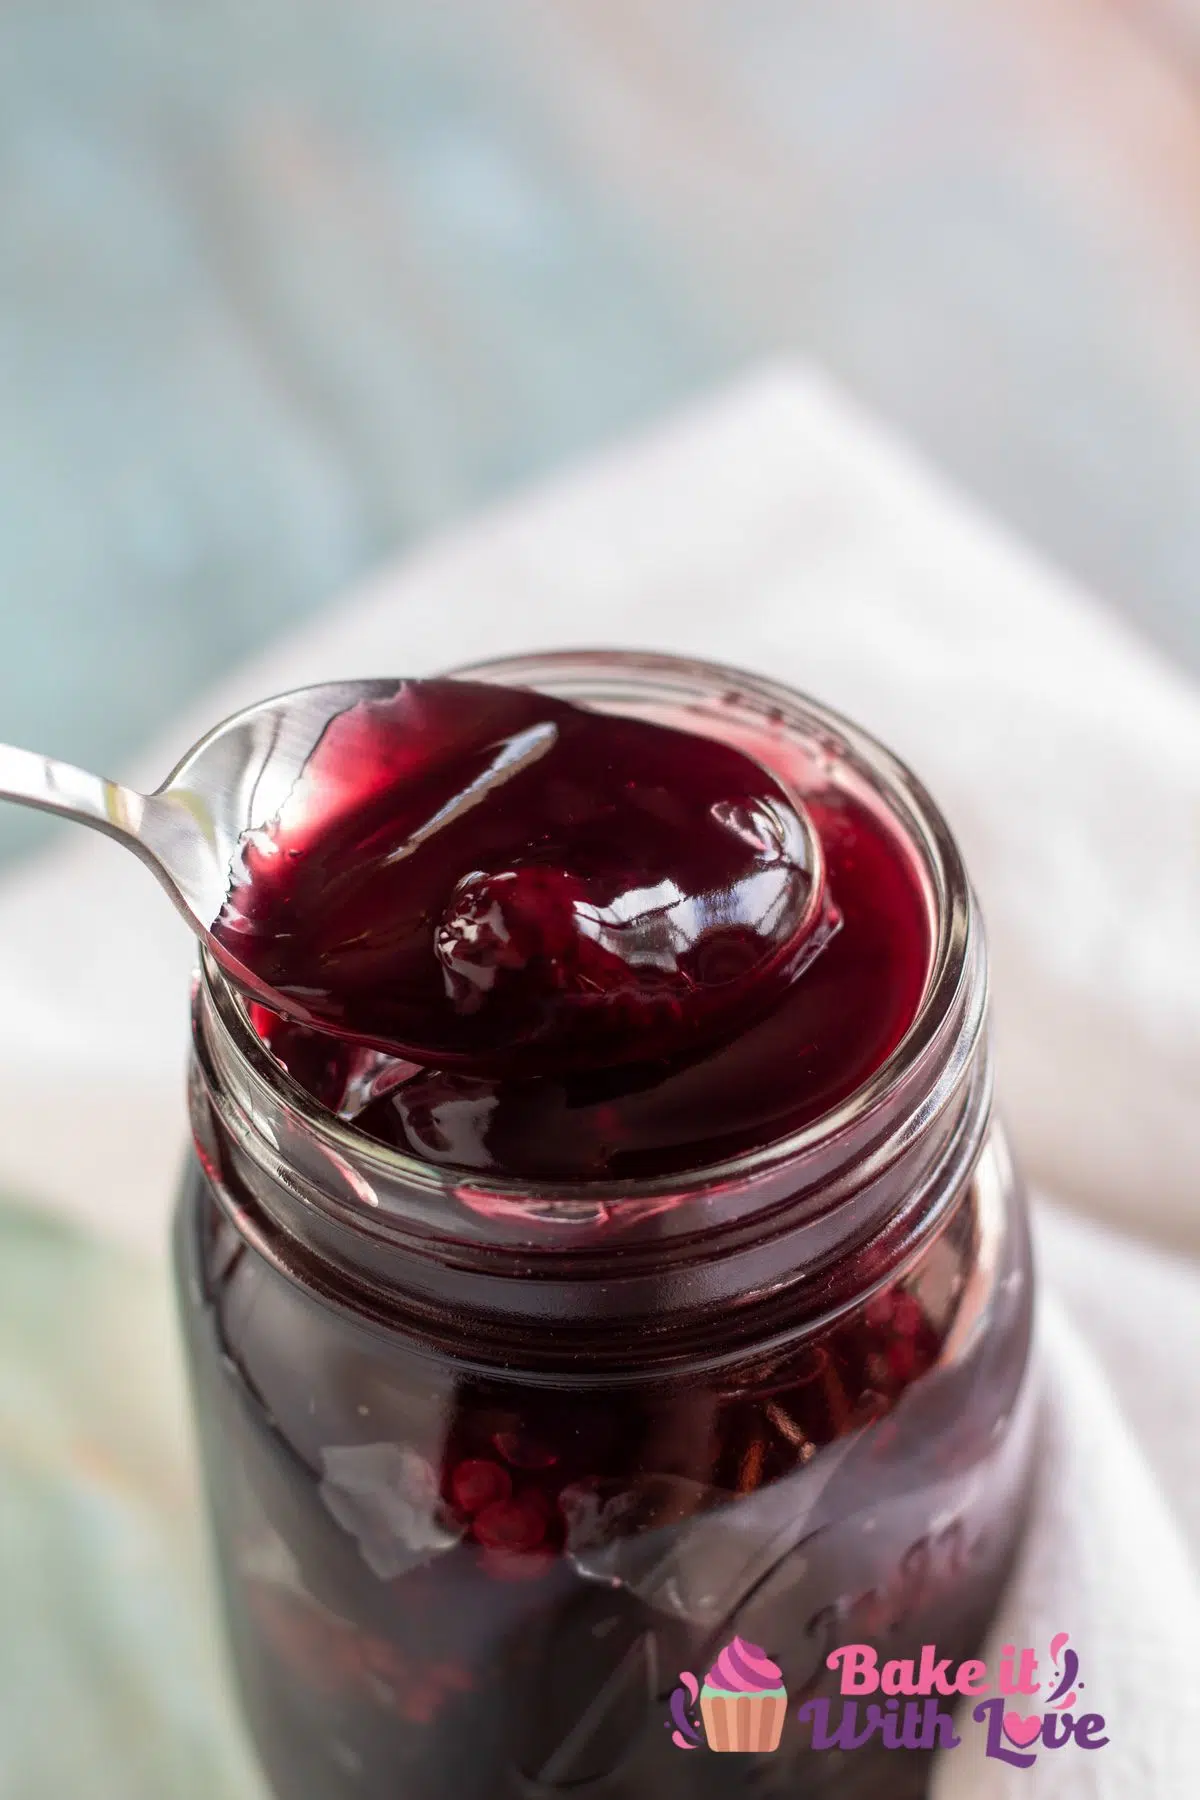 Tall image of blackberry pie filling in a glass jar with a spoon full of the pie filling.